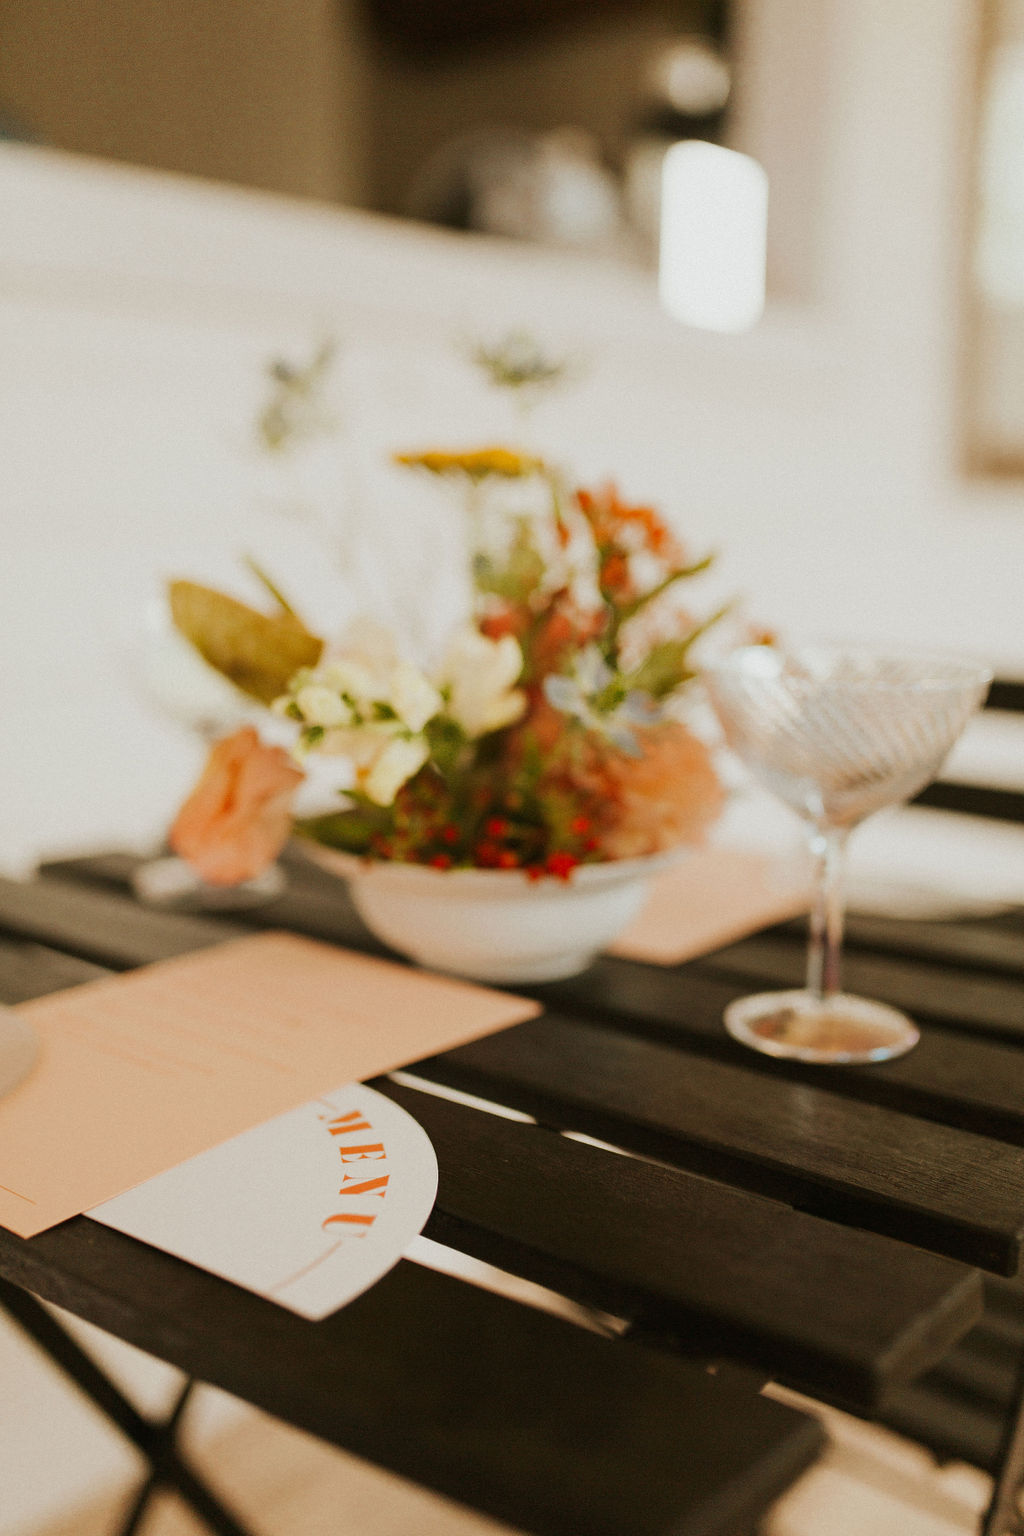 Tangerine wedding inspiration for a summer wedding with an outdoor tablescape